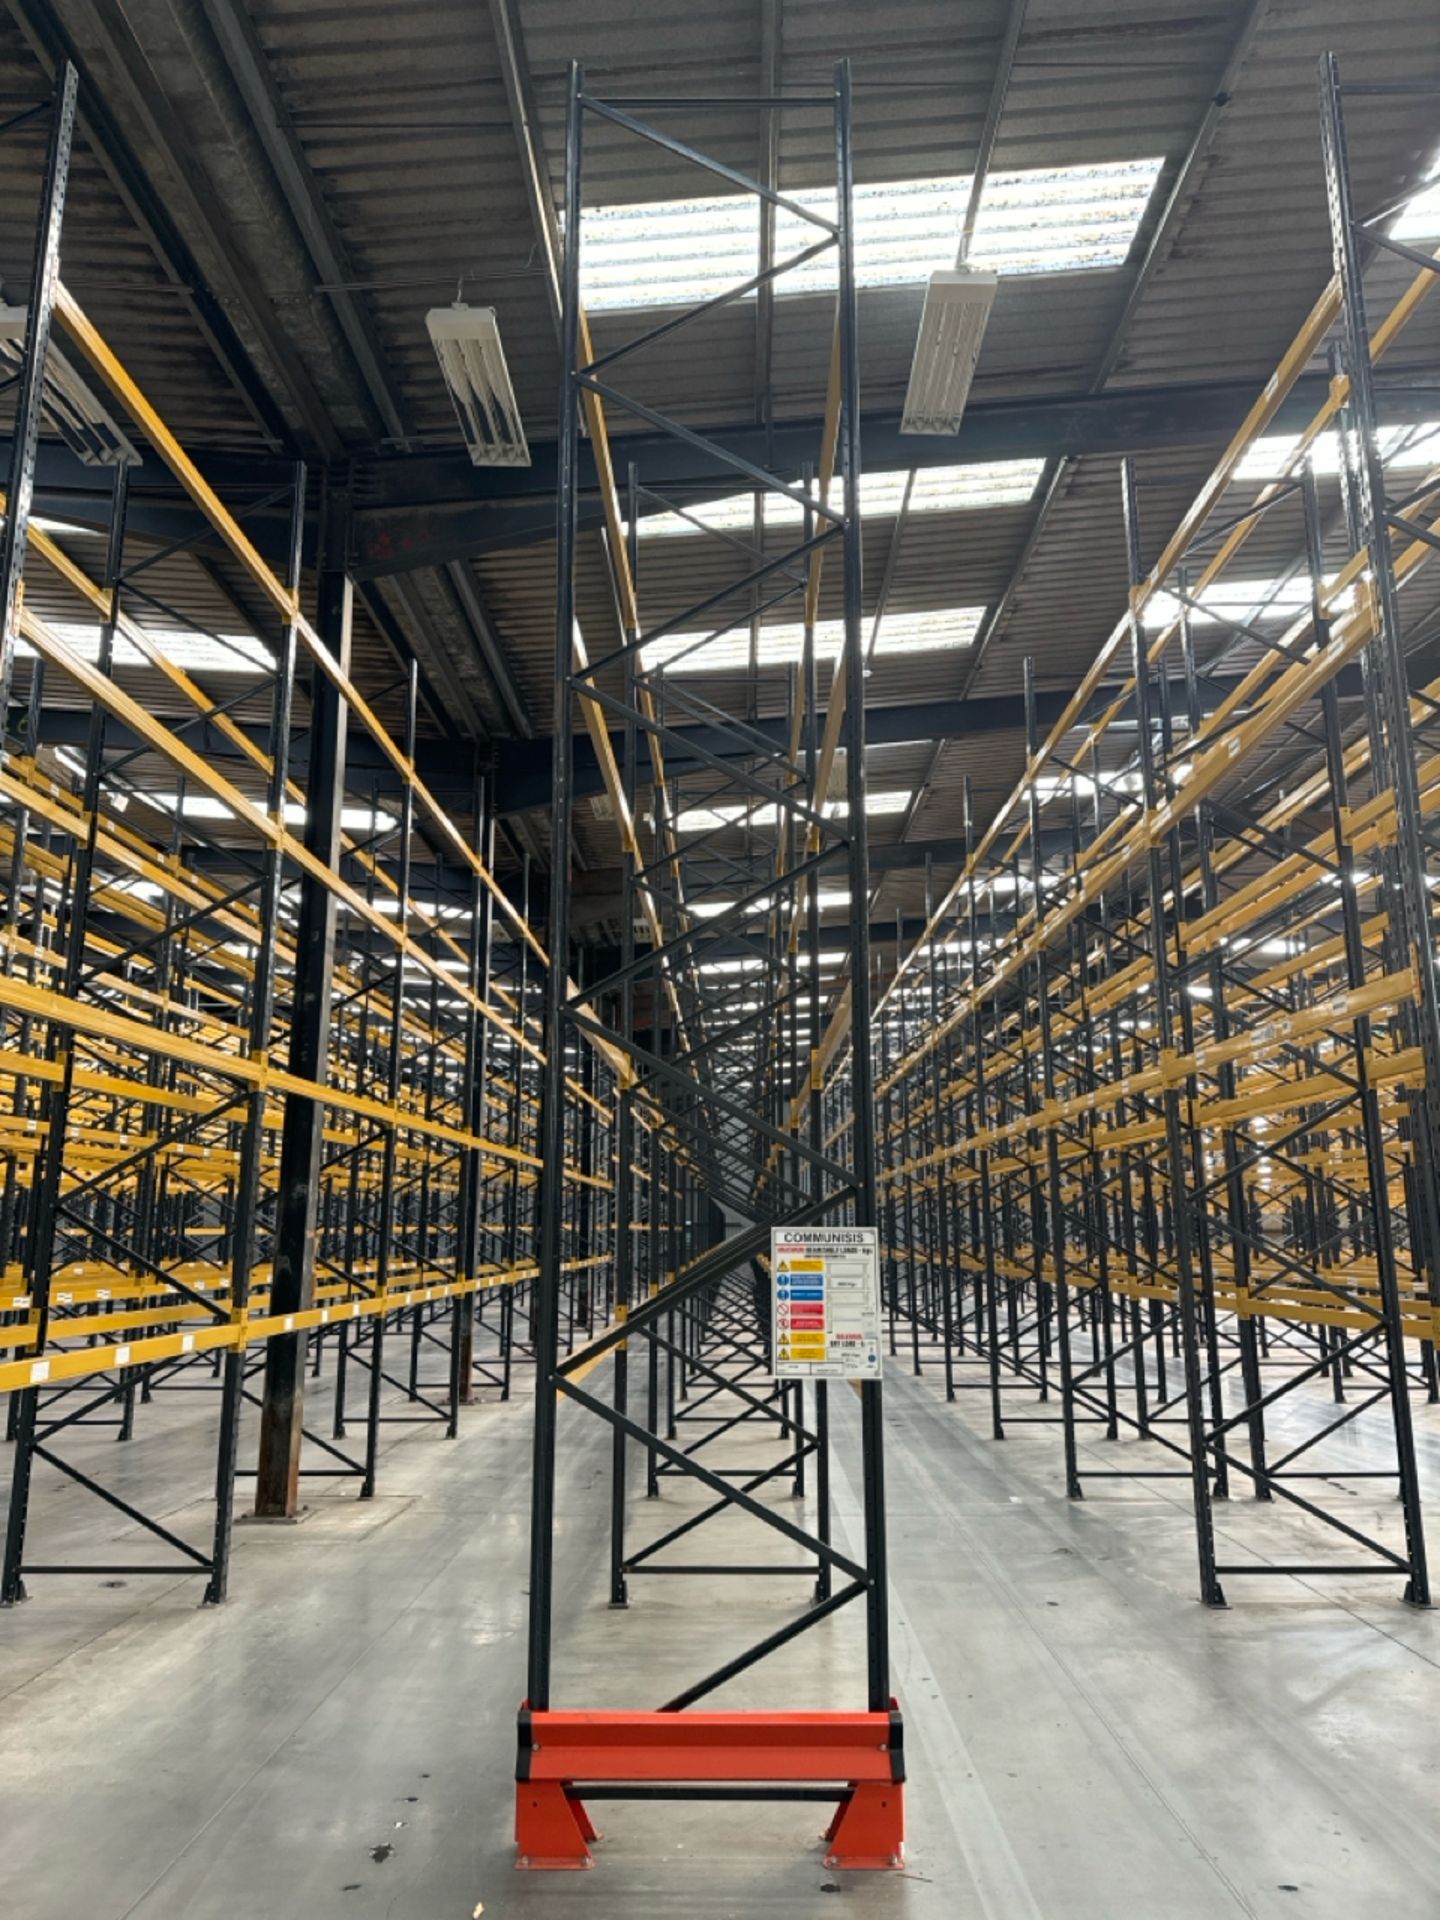 20 Bays Of Boltless Pallet Industrial Racking - Image 2 of 8